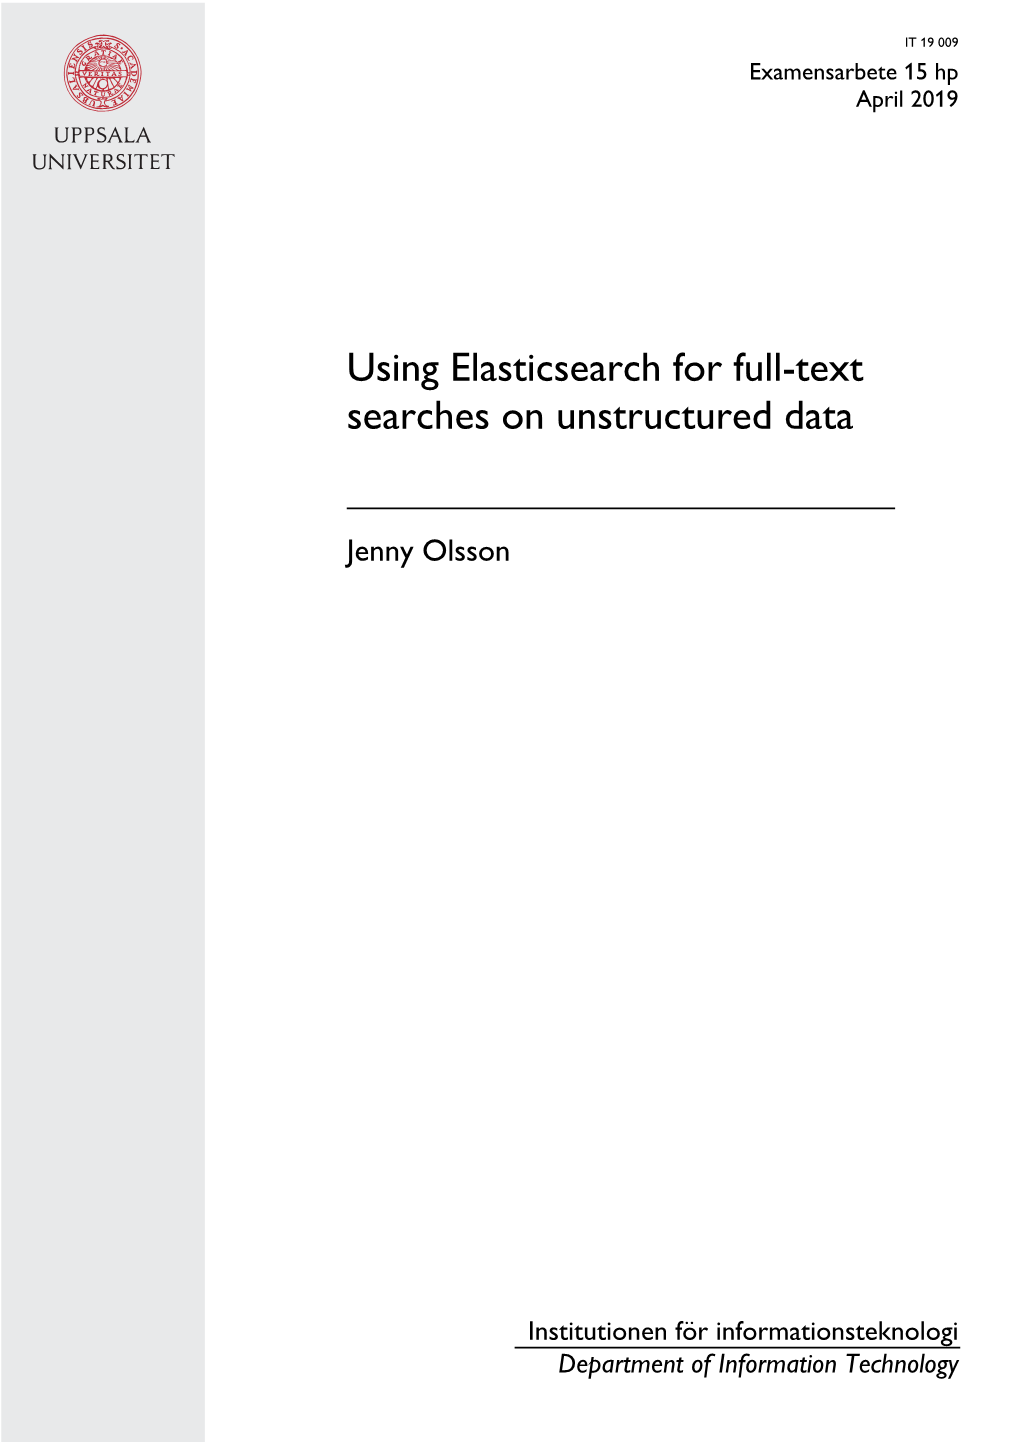 Using Elasticsearch for Full-Text Searches on Unstructured Data